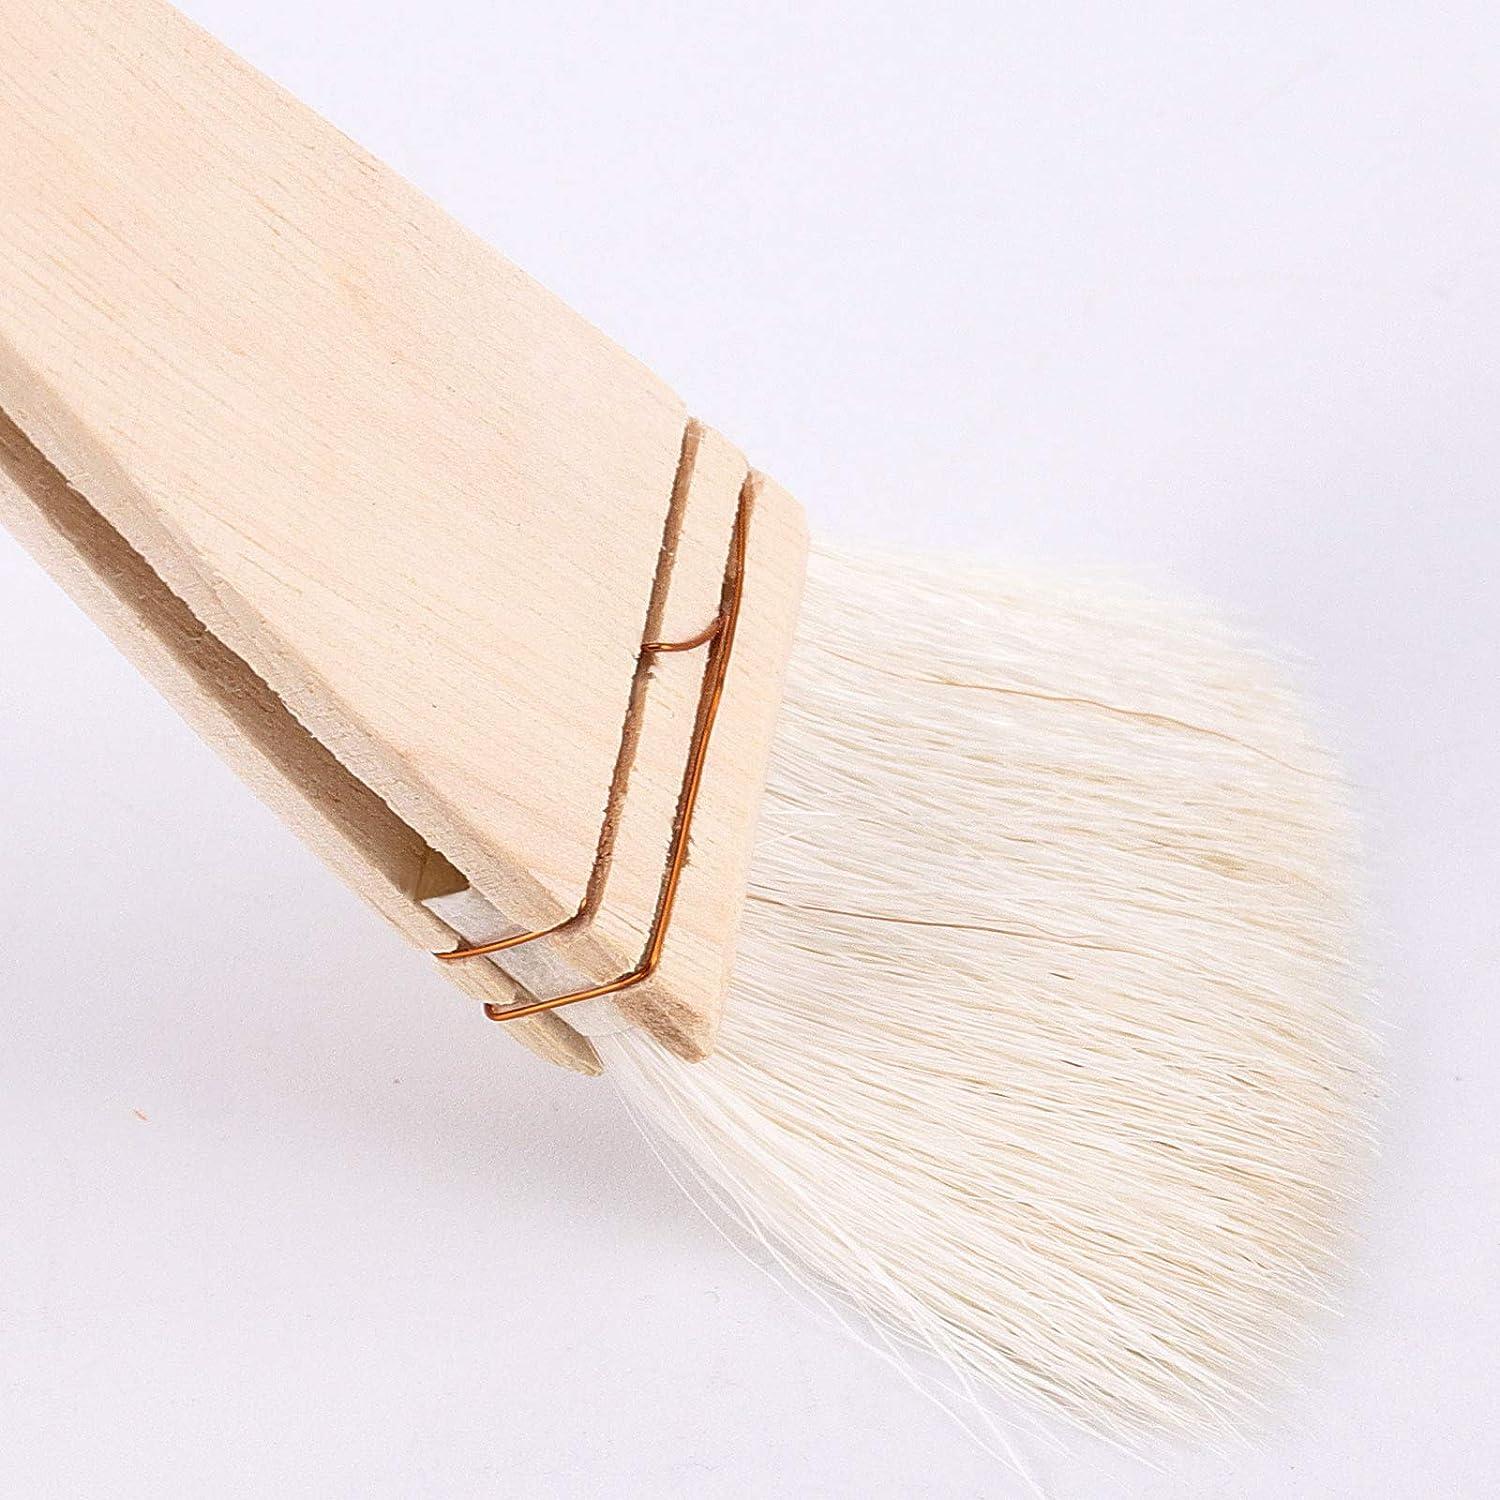 ZEONHEI 8 Pcs 1 inch Flat Hake Brushes, Soft Goat Hair Brush and Hake Paint Brush with Solid Wooden Handle, Hake Brush Set for Watercolor Pottery